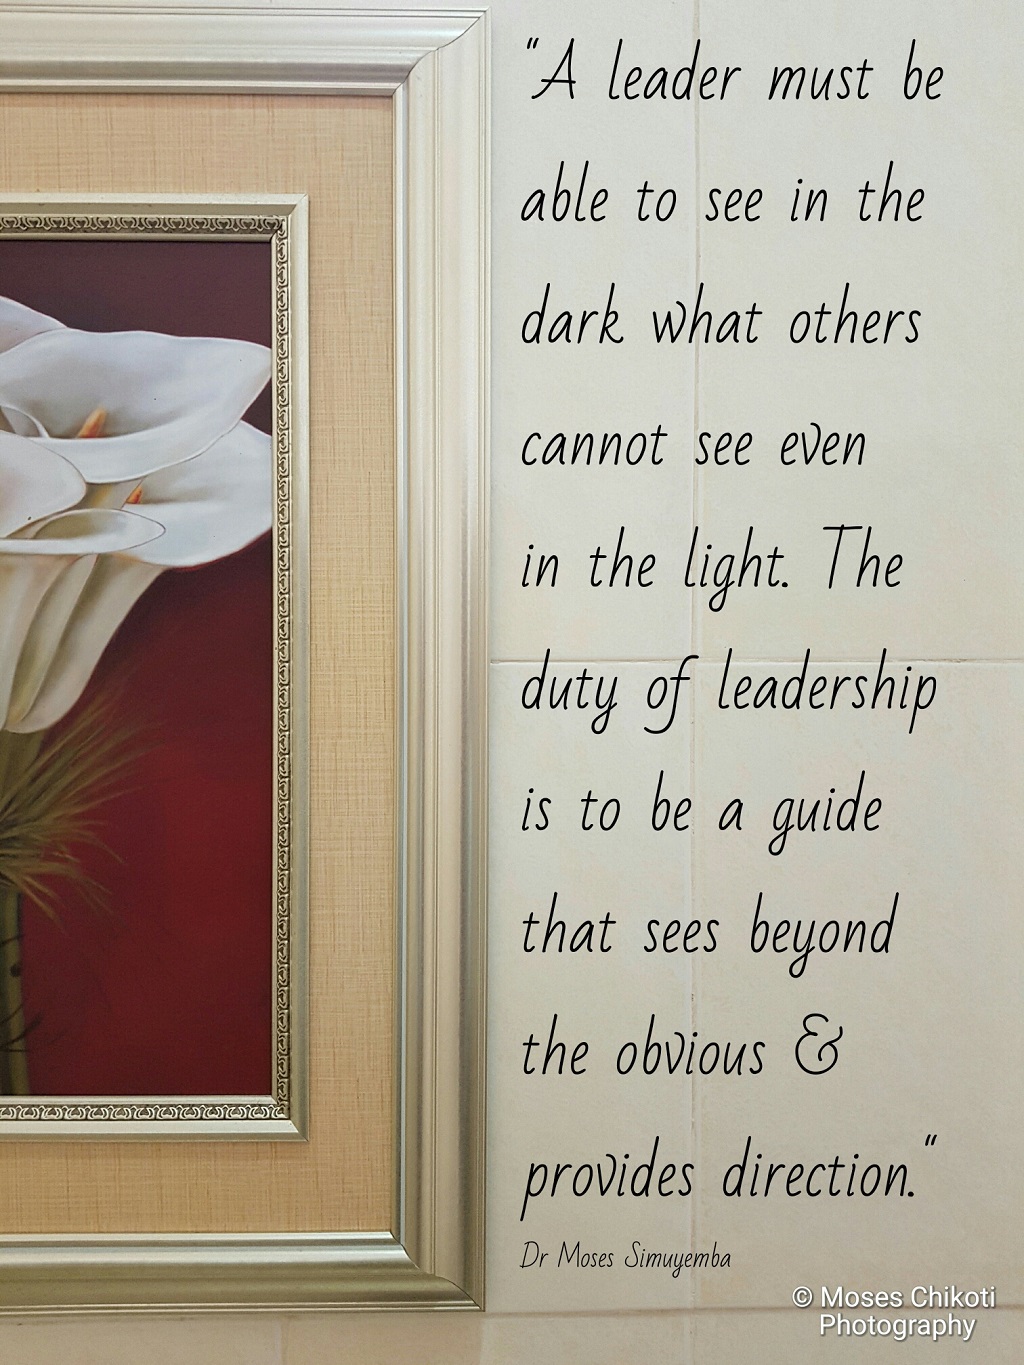 A leader must be able to see in the dark what others cannot see even in the light the duty of leadership is to be a guide that sees beyond the obvious and provides direction – Dr. Moses Simuyemba